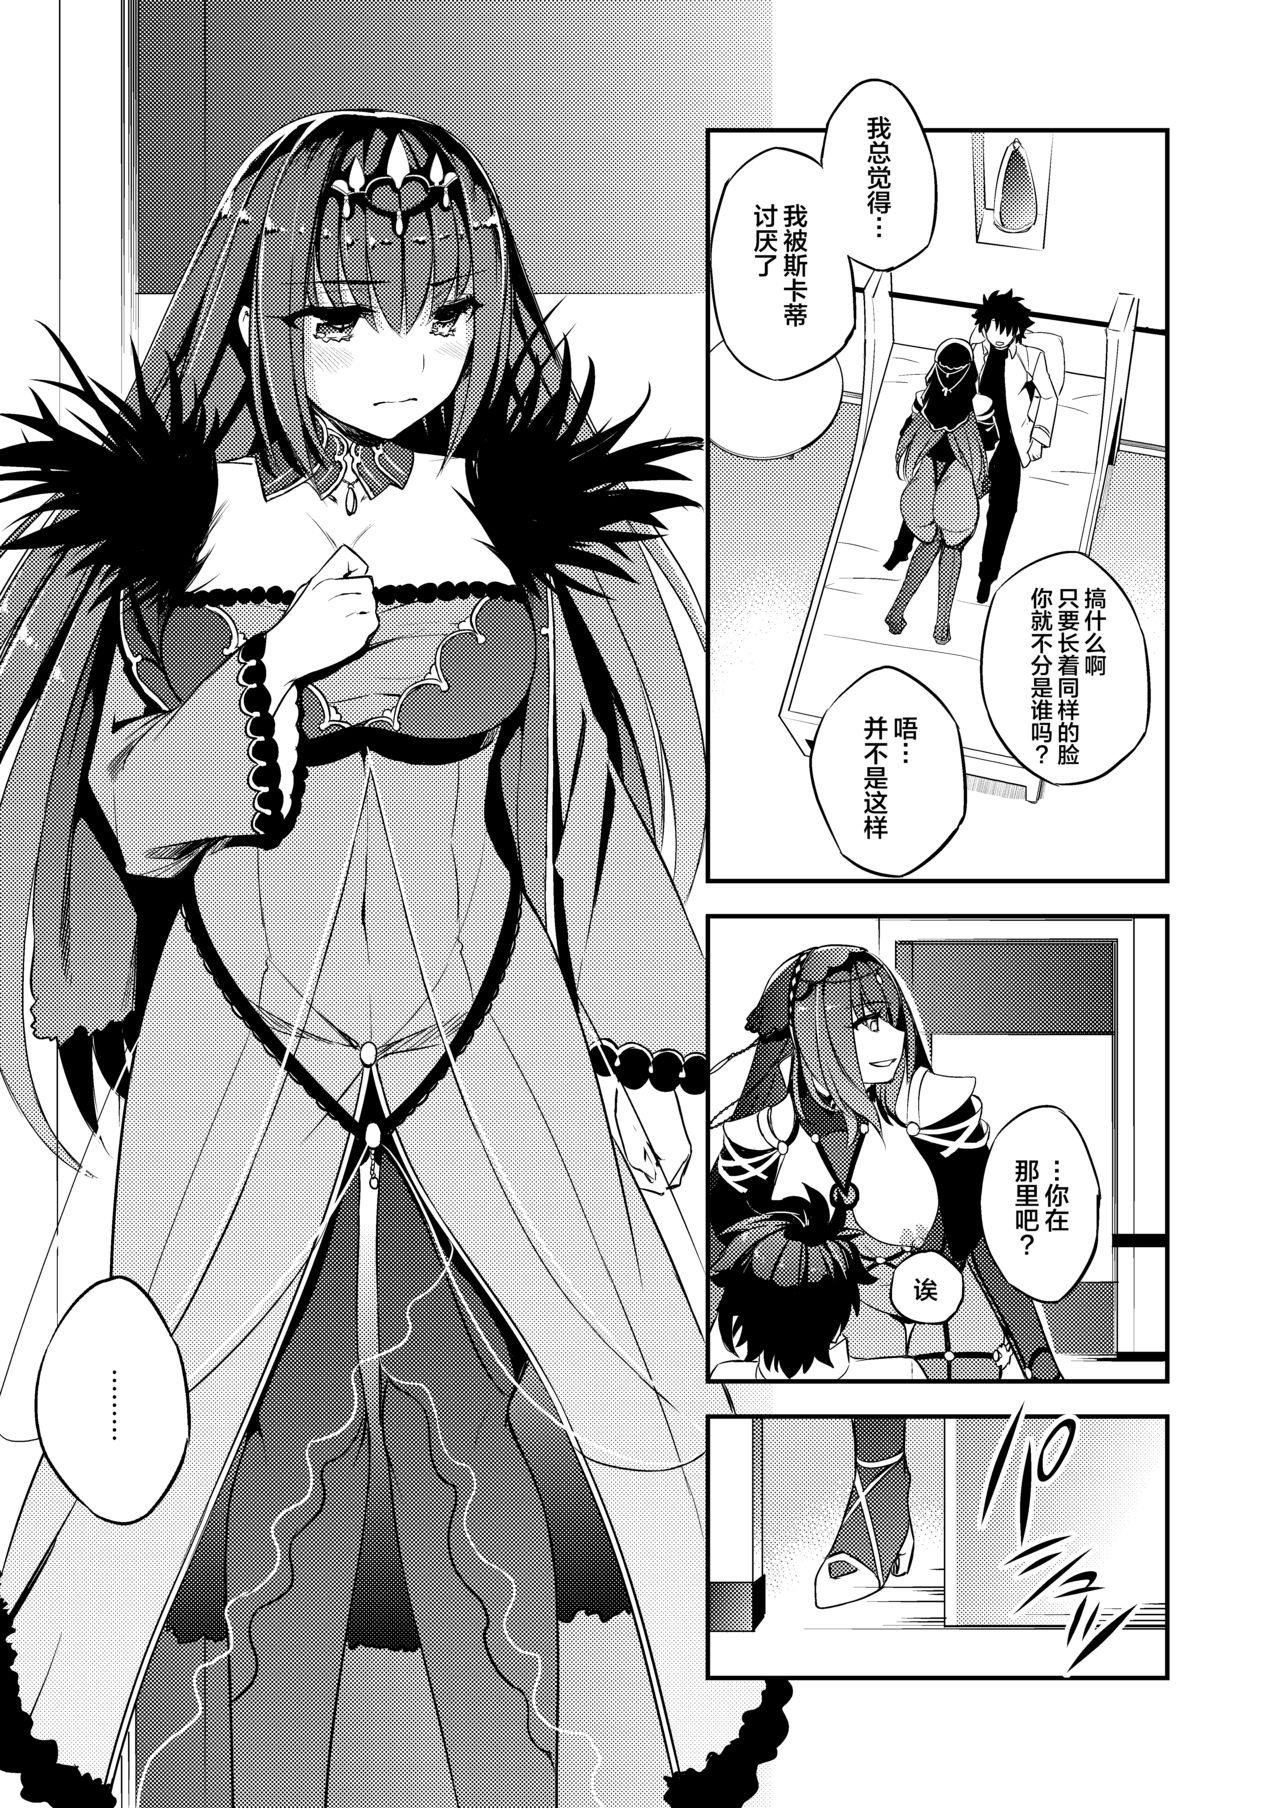 Balls C9-39 W Scathach to - Fate grand order Gay Bang - Page 5